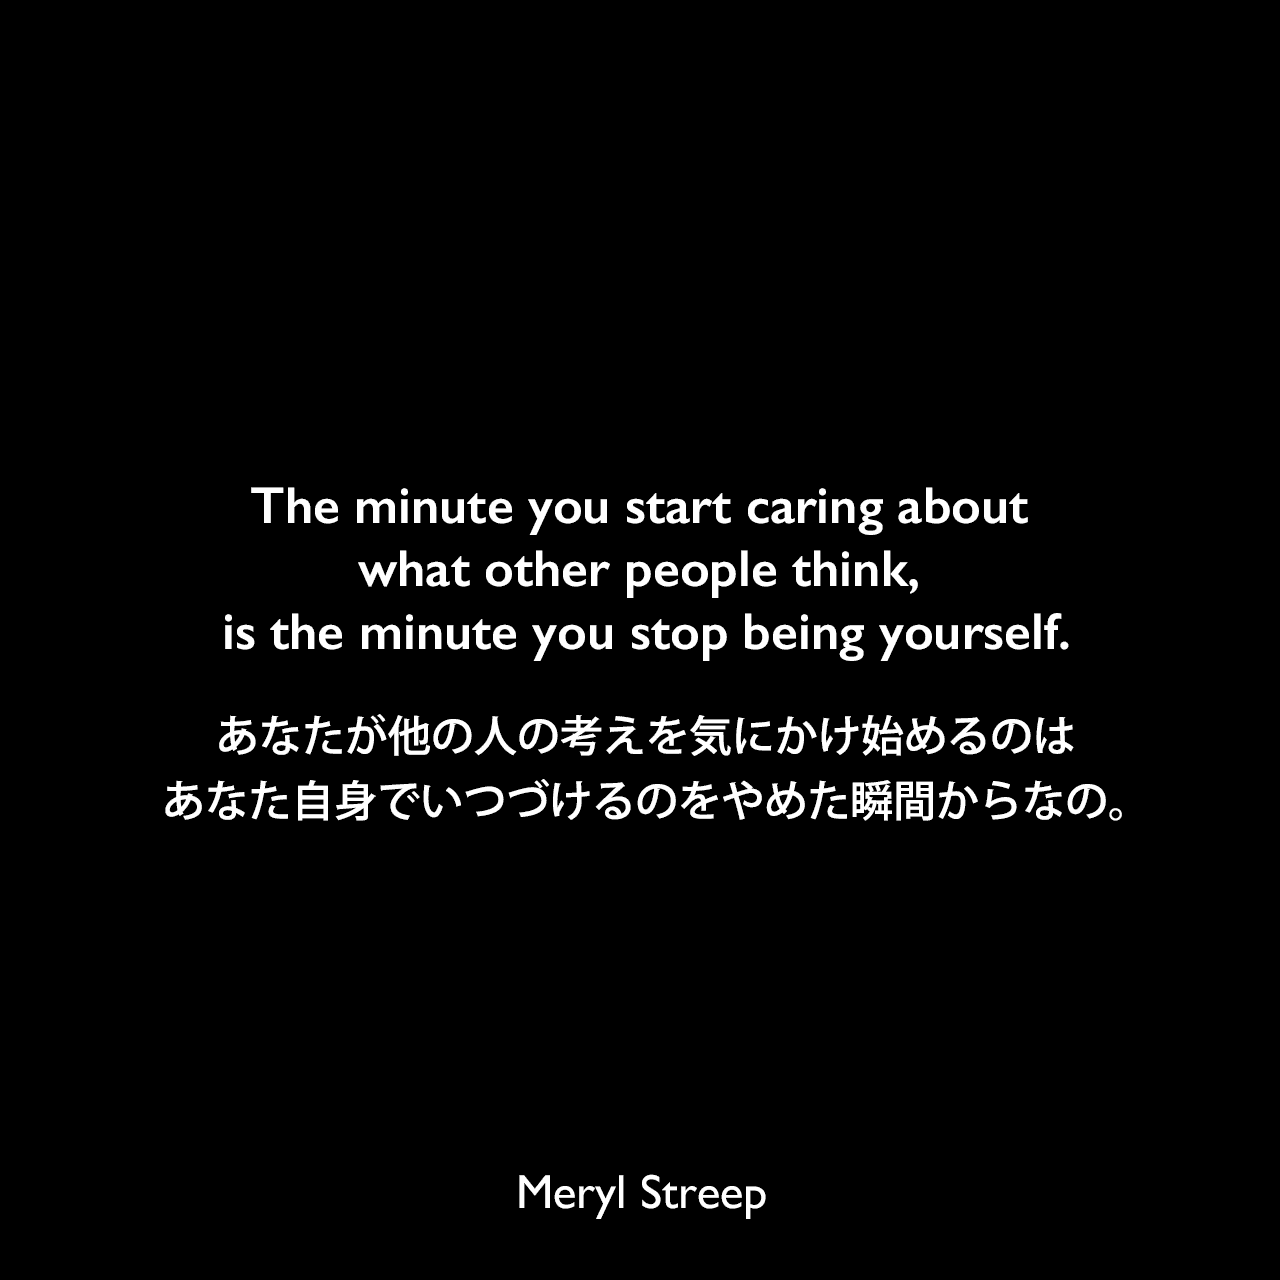 The minute you start caring about what other people think, is the minute you stop being yourself.あなたが他の人の考えを気にかけ始めるのは、あなた自身でいつづけるのをやめた瞬間からなの。Meryl Streep